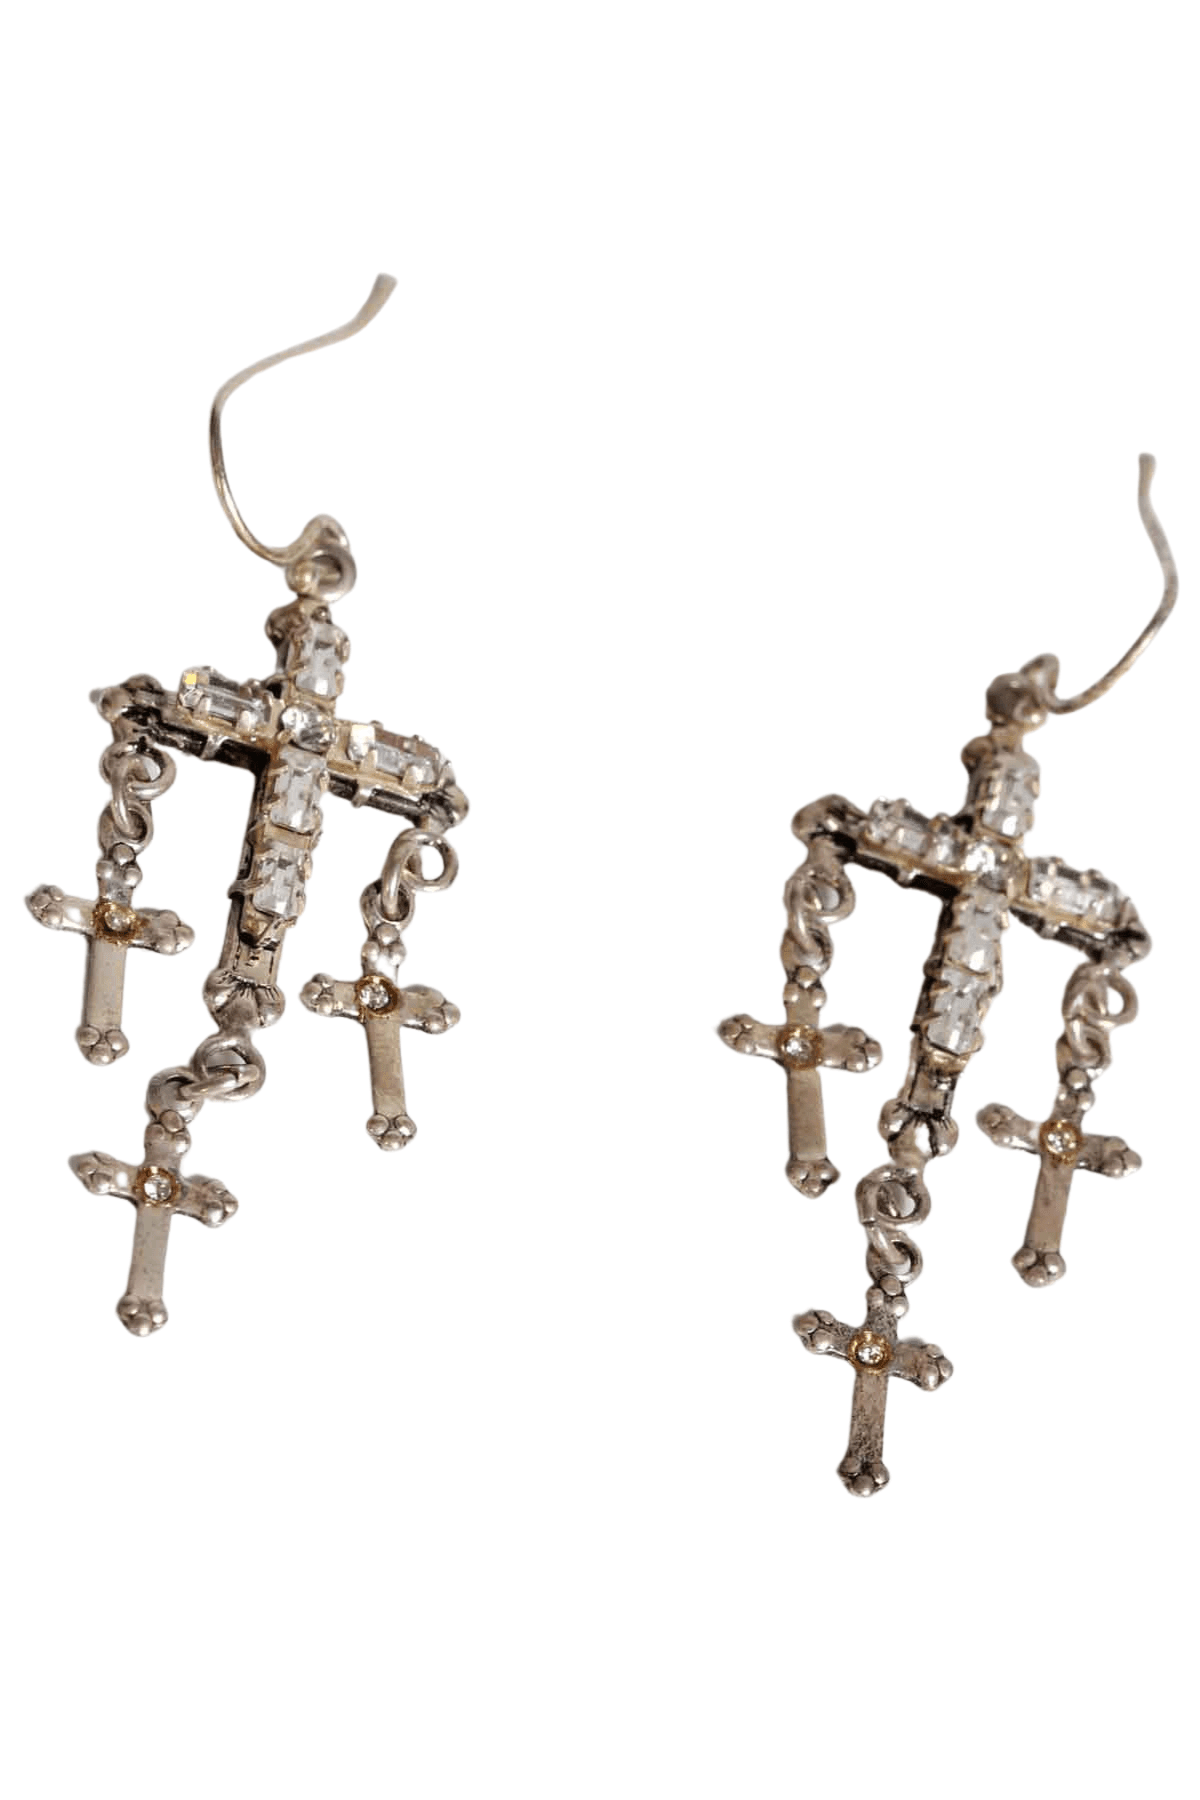 Silver clear faceted crystal encrusted cross earrings with 3 tiny crosses dangling on each end by Virgin Saints and Angels